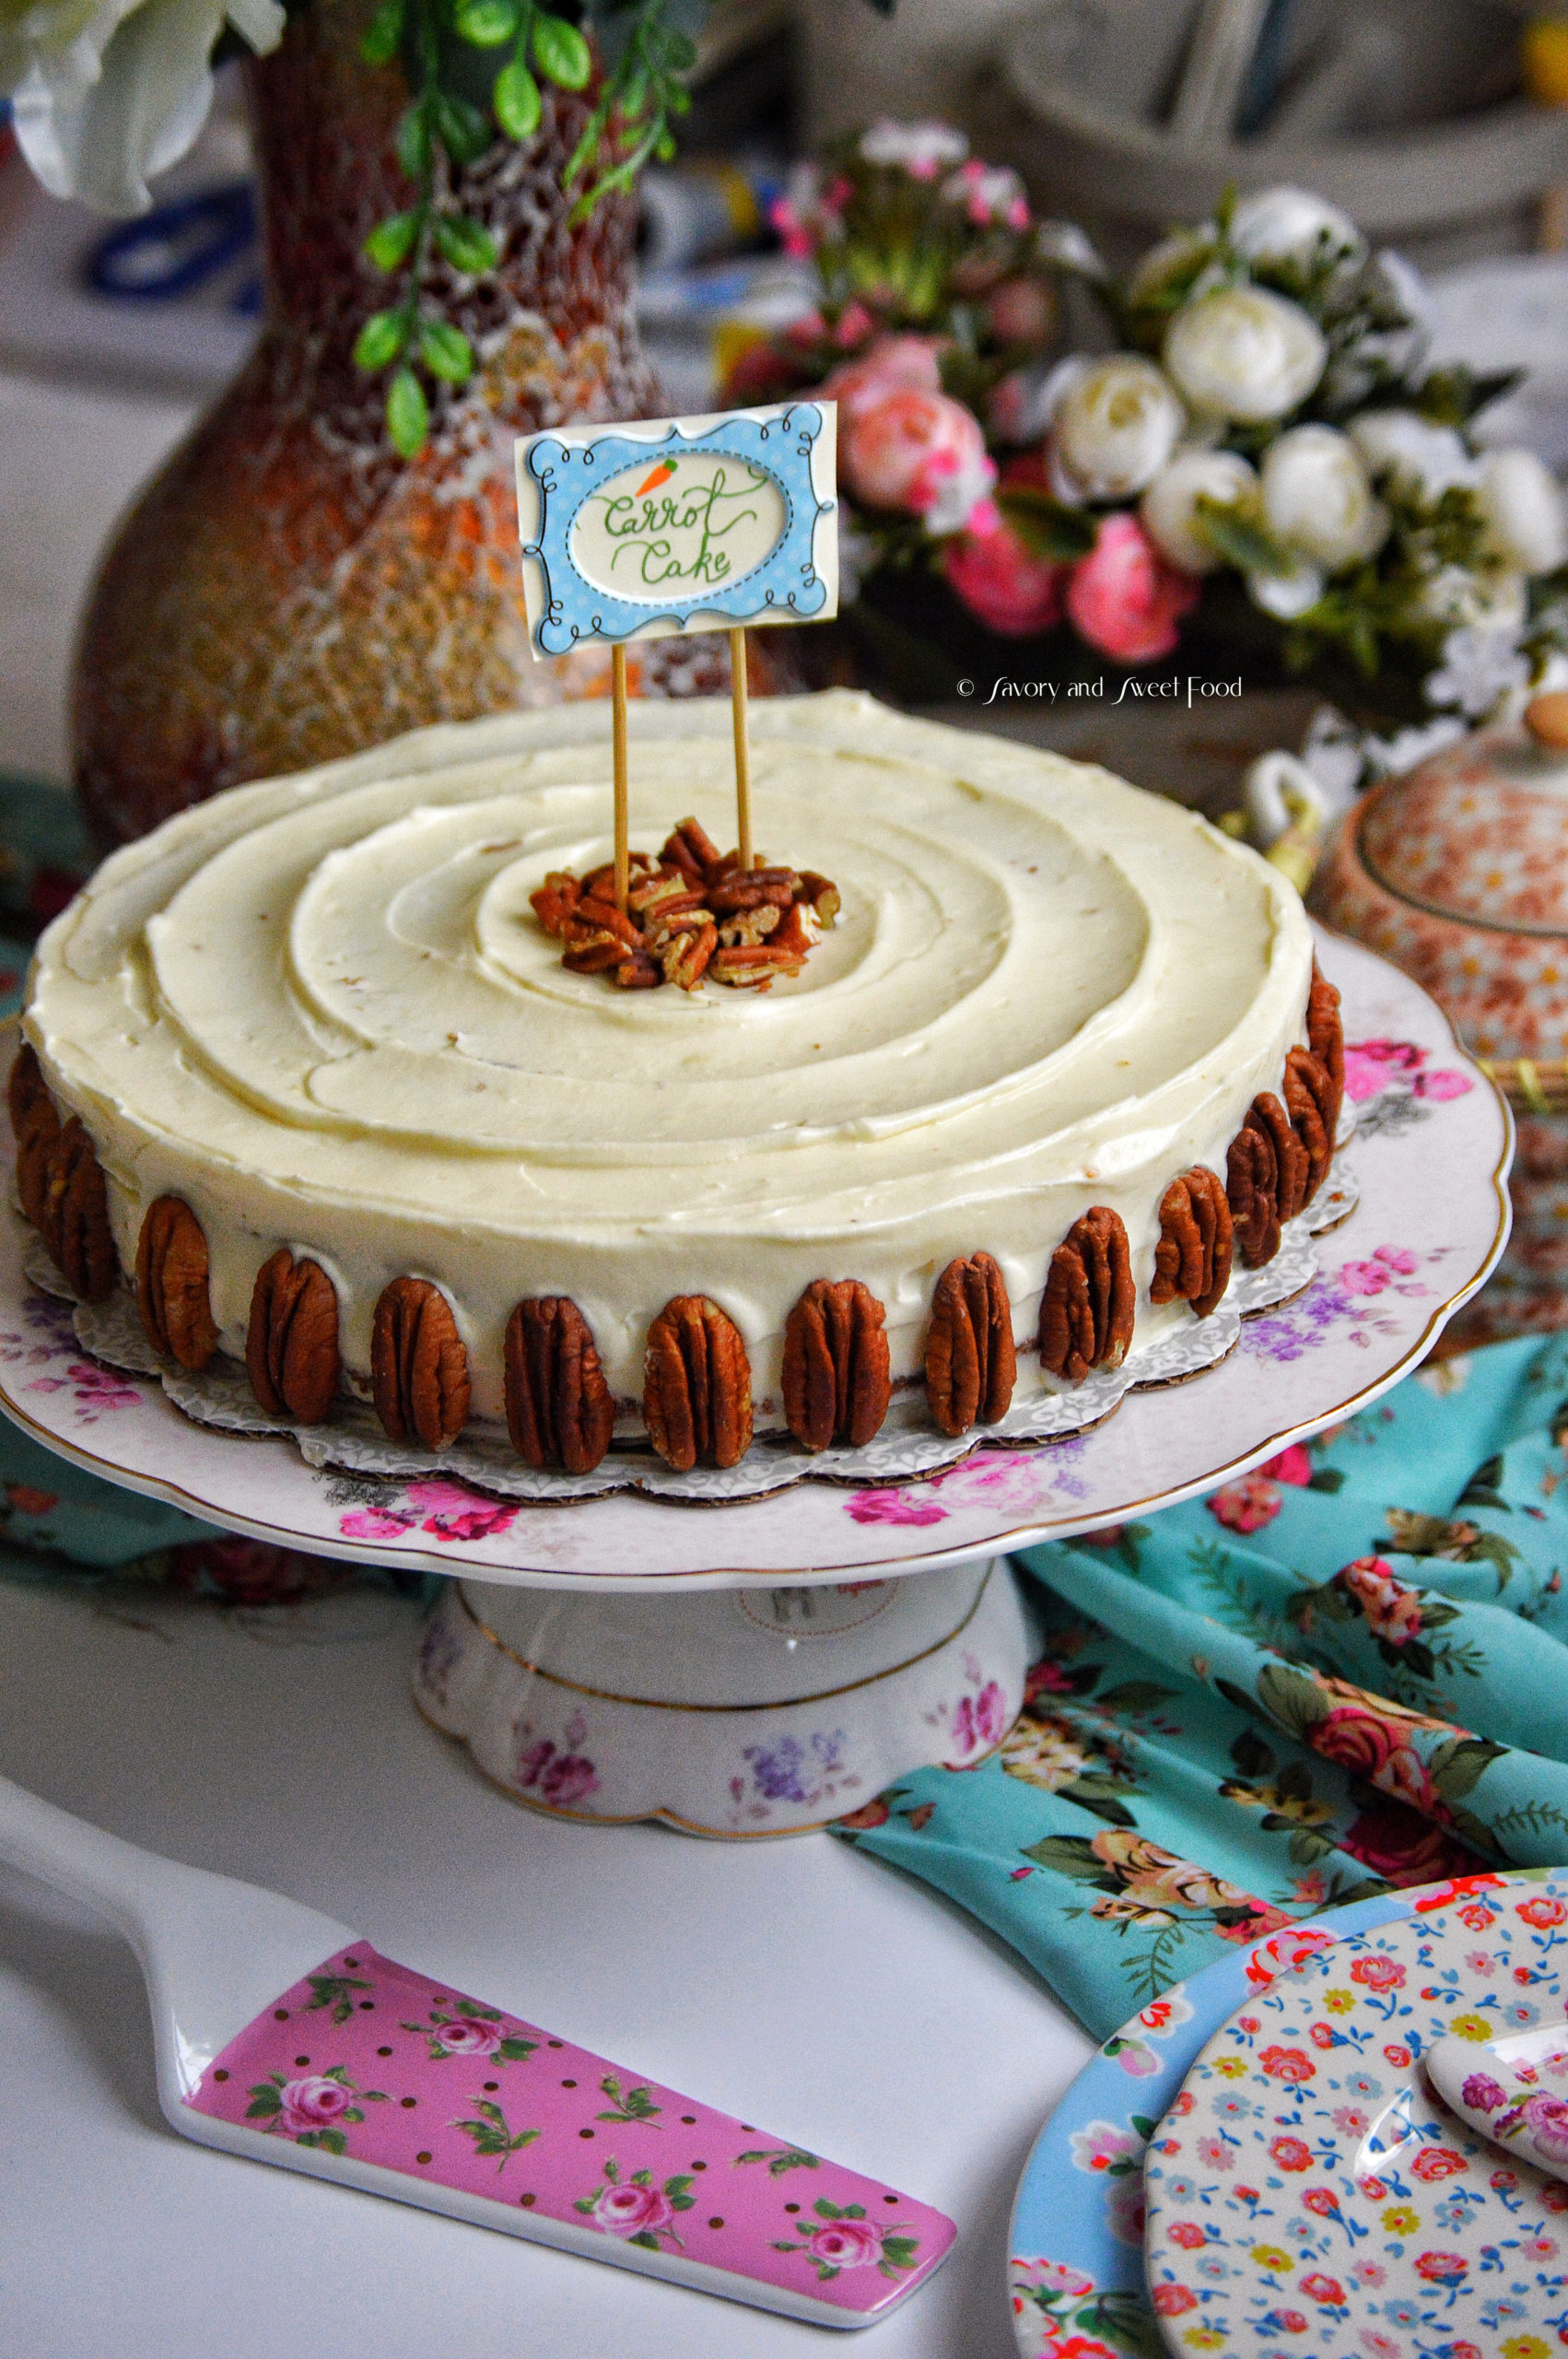 Perfect Carrot Cake with Cream Cheese Frosting - Savory&SweetFood